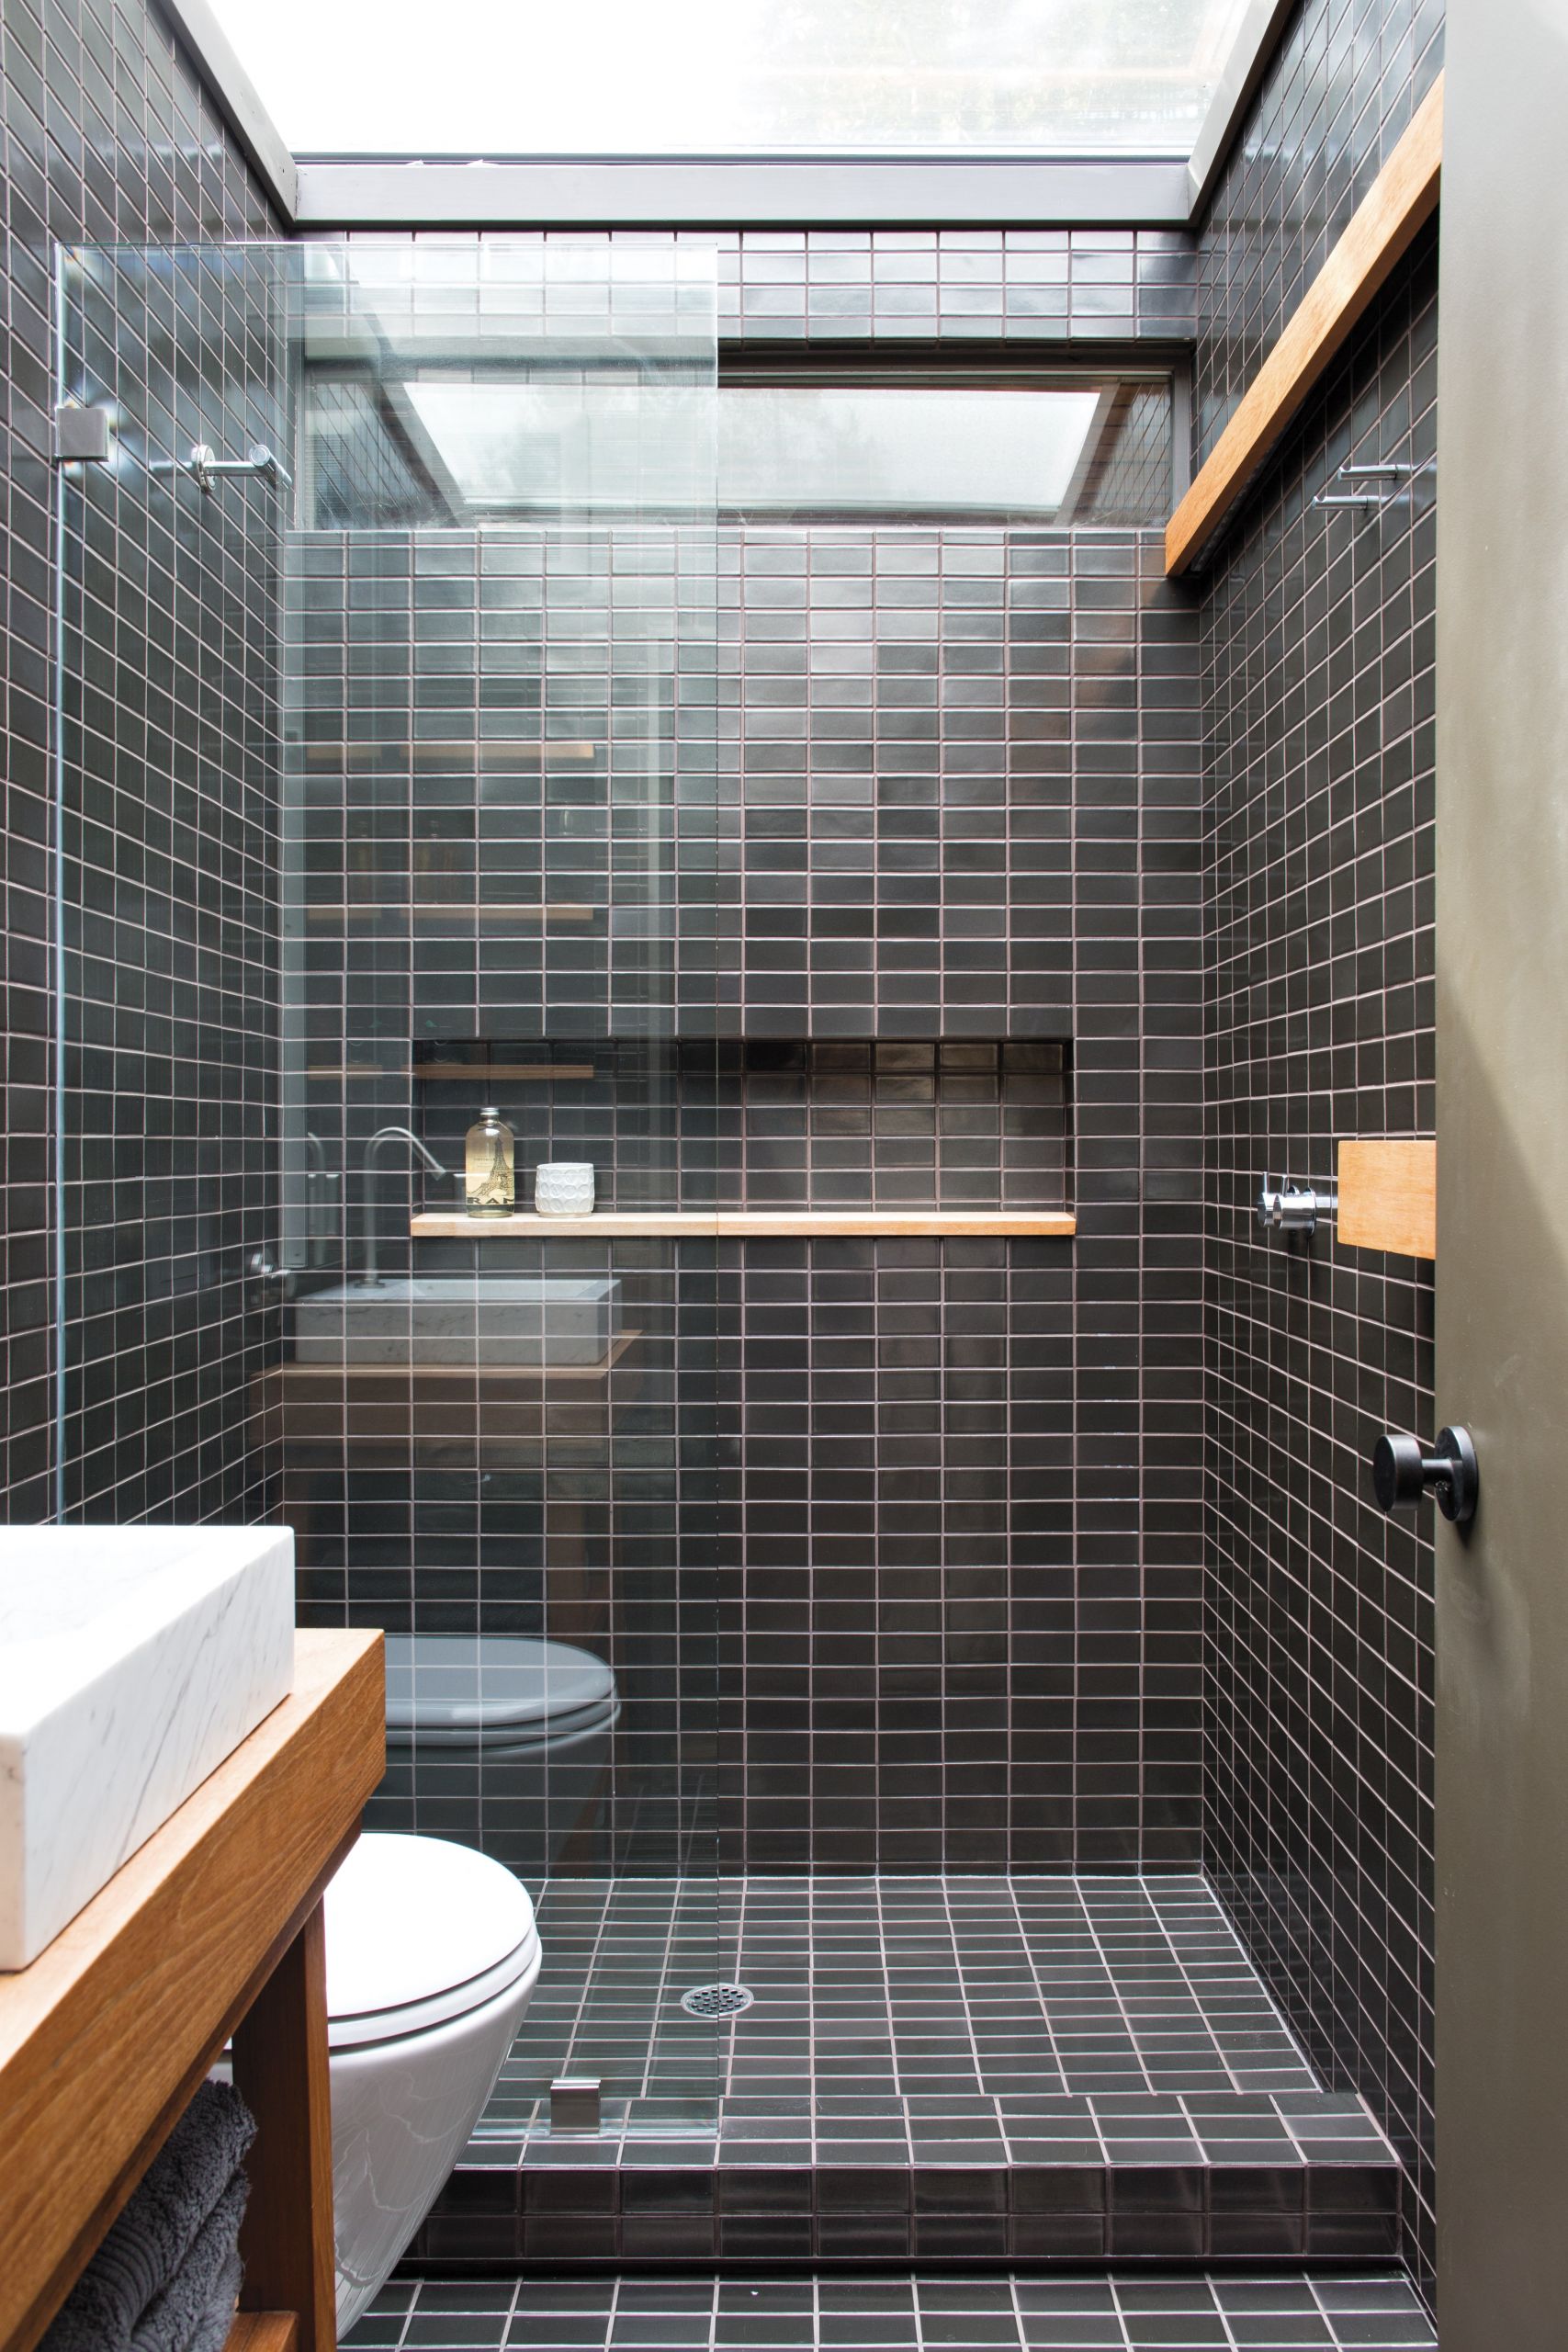 Bathroom Tile Examples
 How to Create the Bathroom Tile Design of Your Dreams